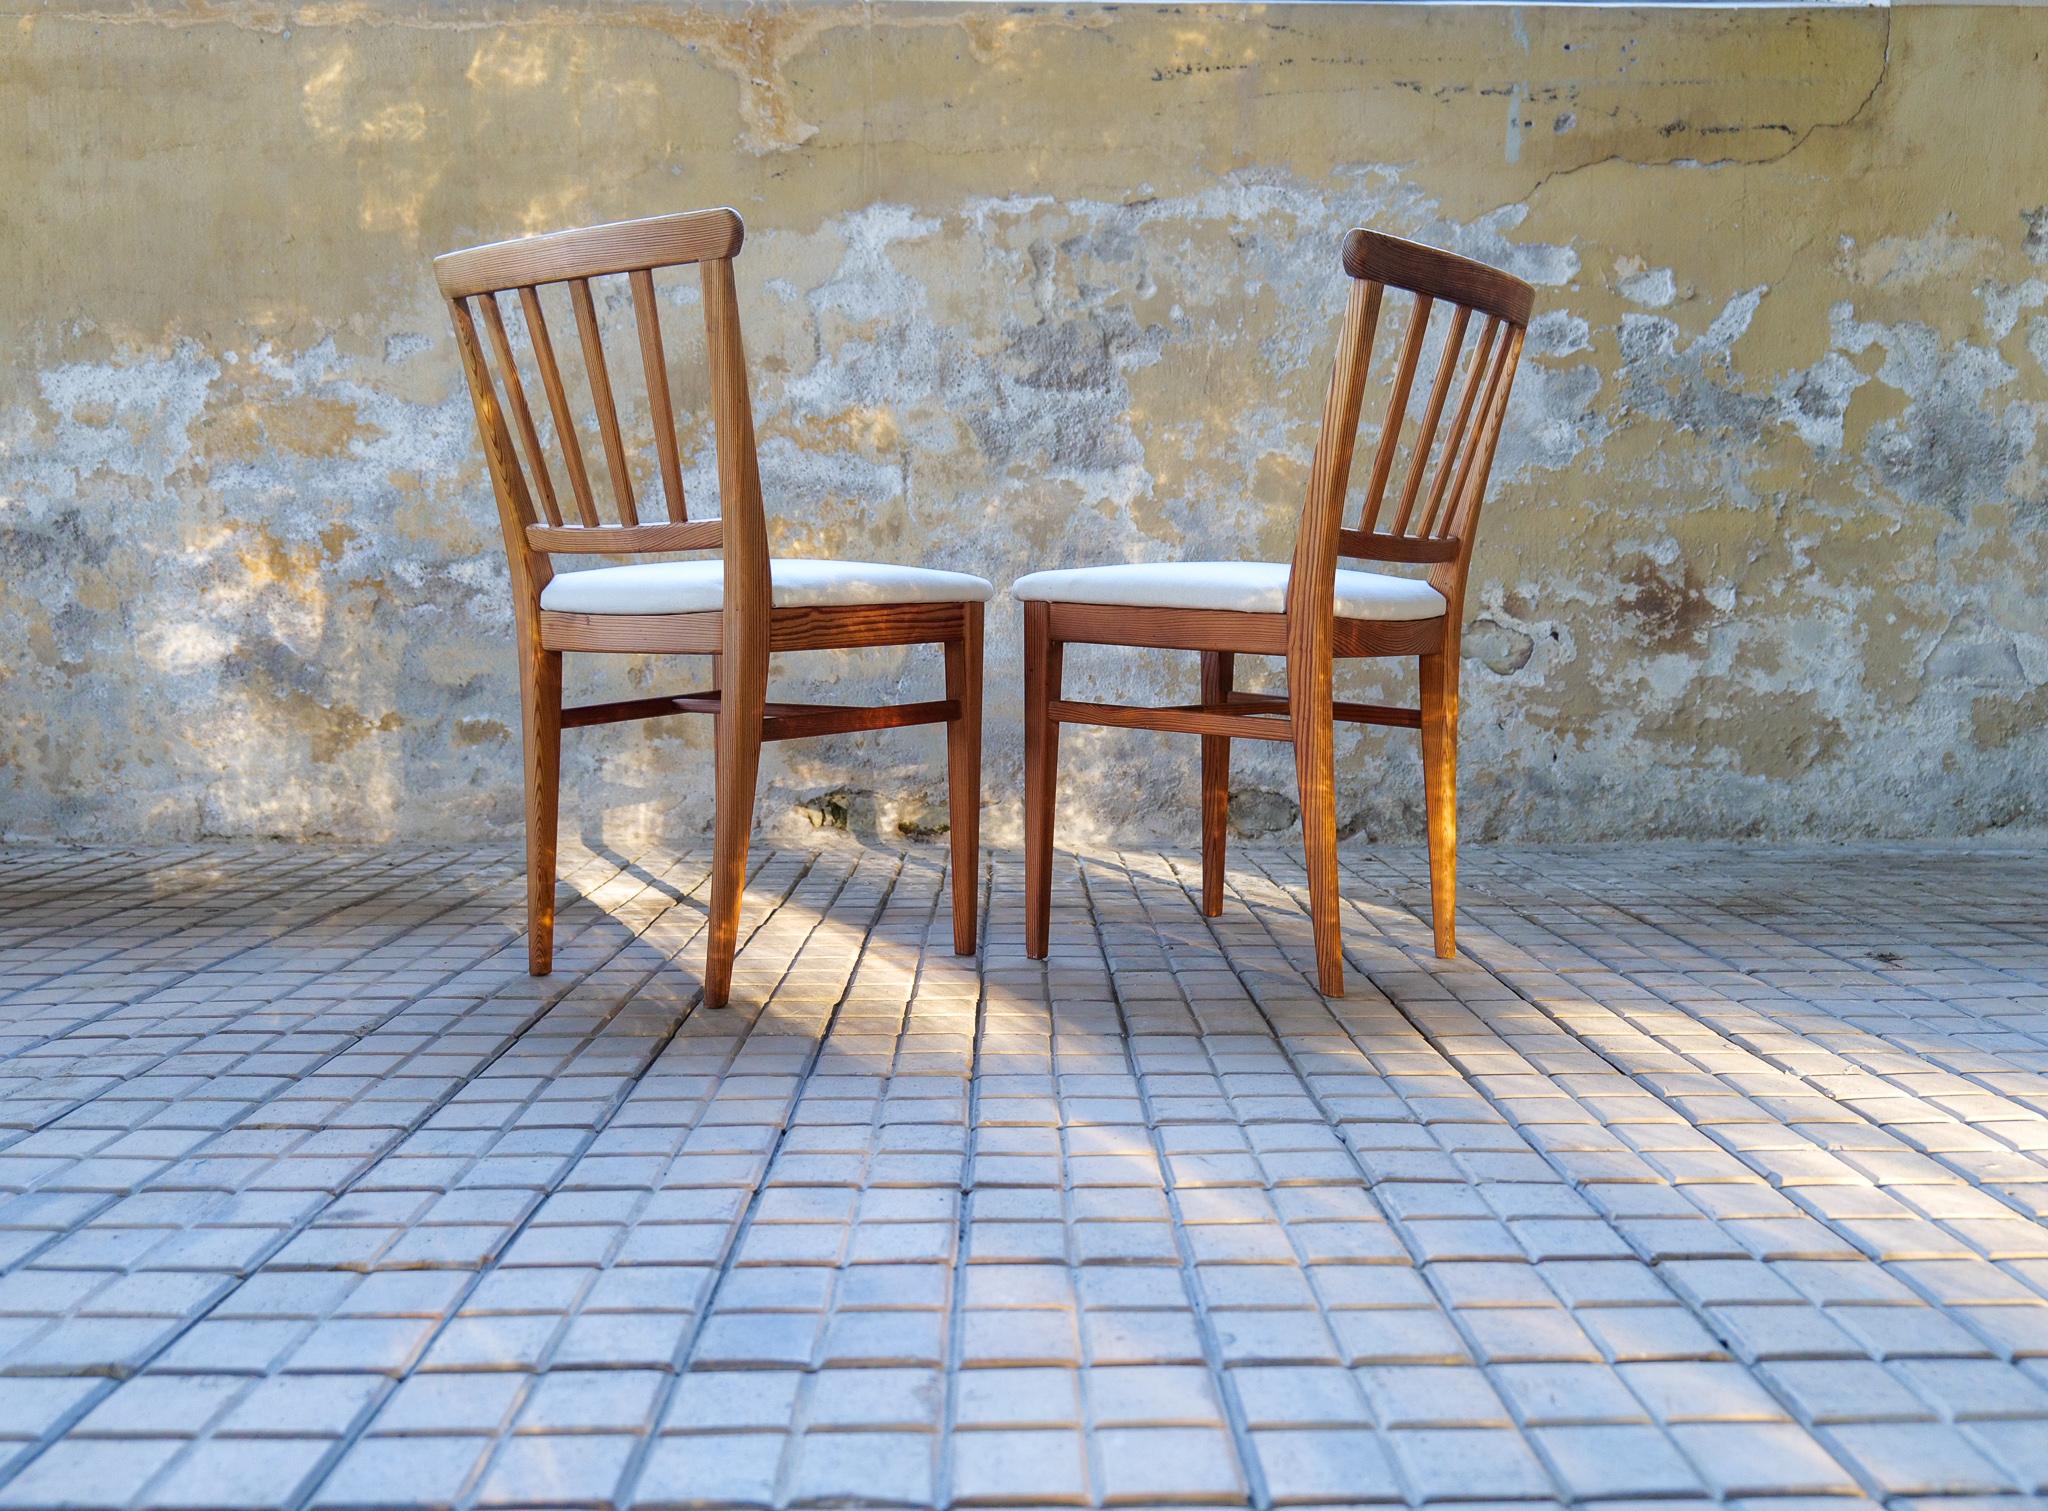 Midcentury Set of 4 Carl Malmsten Chairs Dining in Pine, Sweden, 1940s For Sale 1